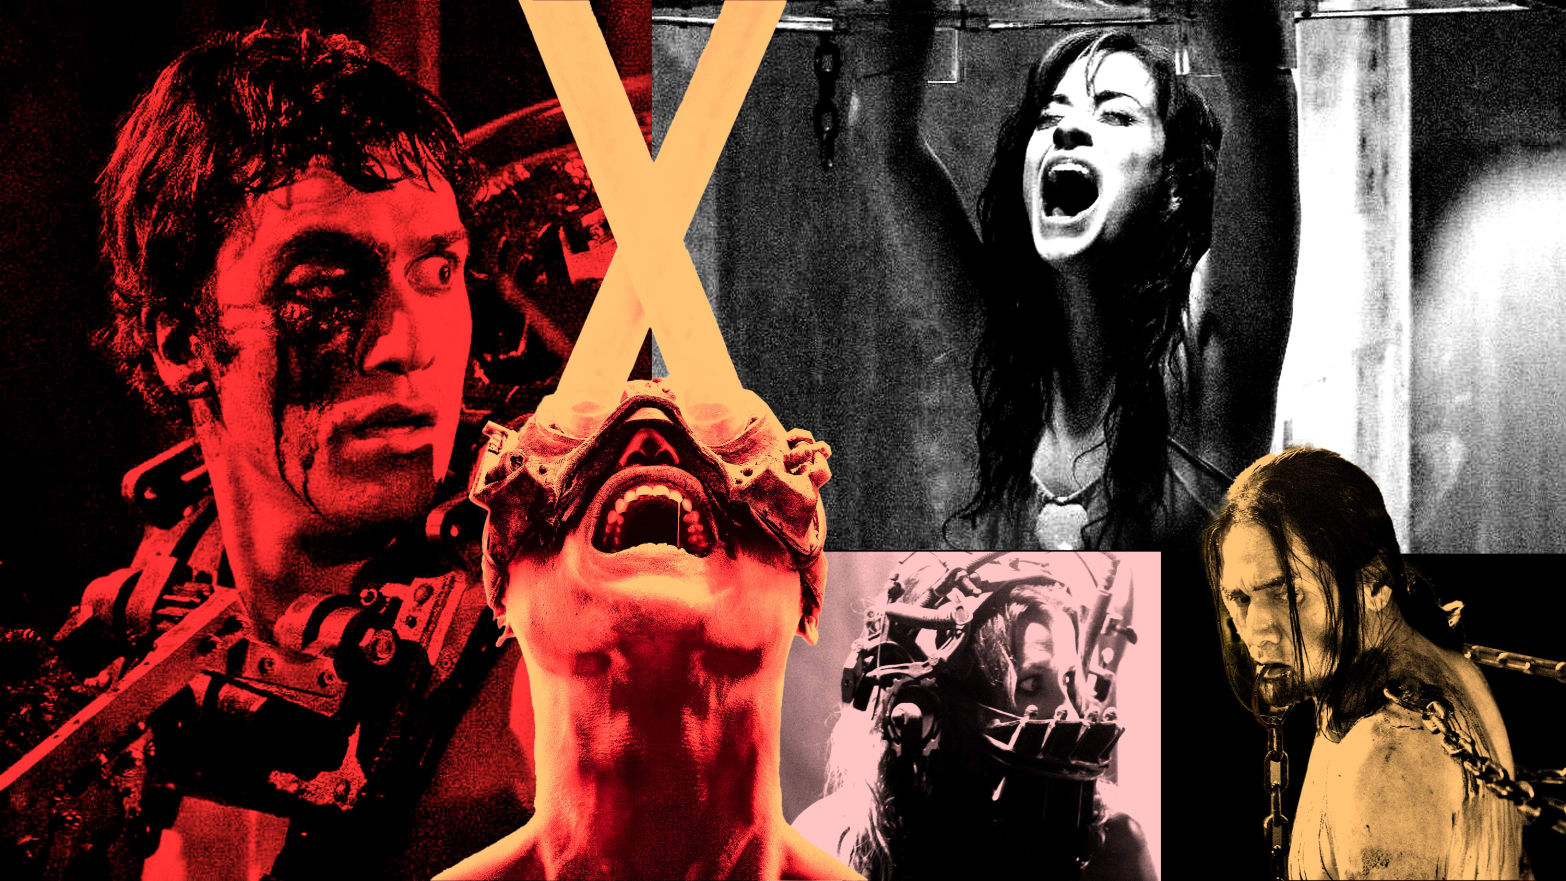 An end of an era: 'Saw X' ends the 'Saw' franchise in a gruesome